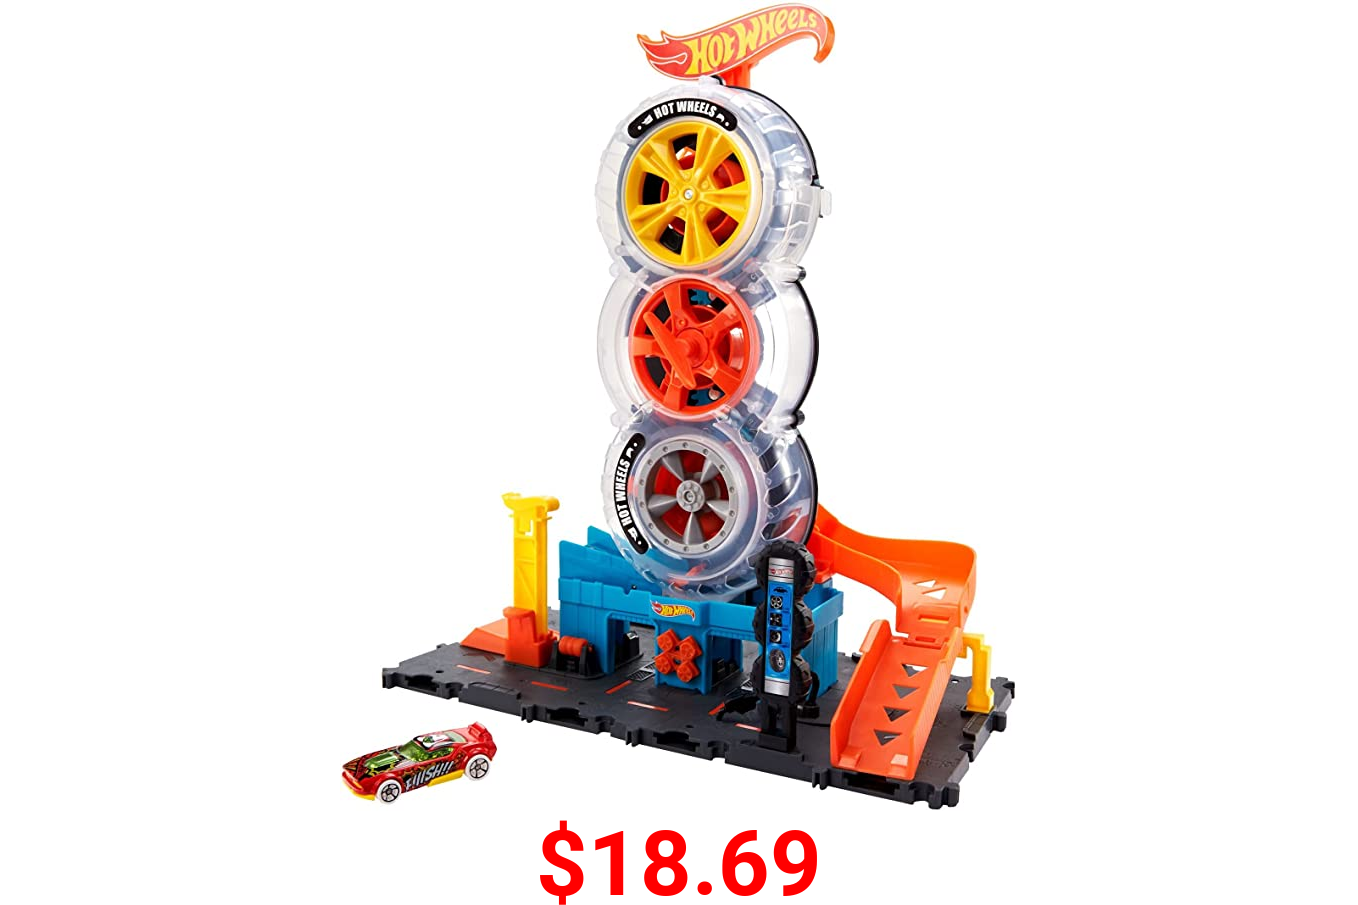 Hot Wheels City Super Twist Tire Shop Playset, Spin The Key to Make Cars Travel Through The Tires, Includes 1 Car, Gift for Kids 4 to 8 Years Old